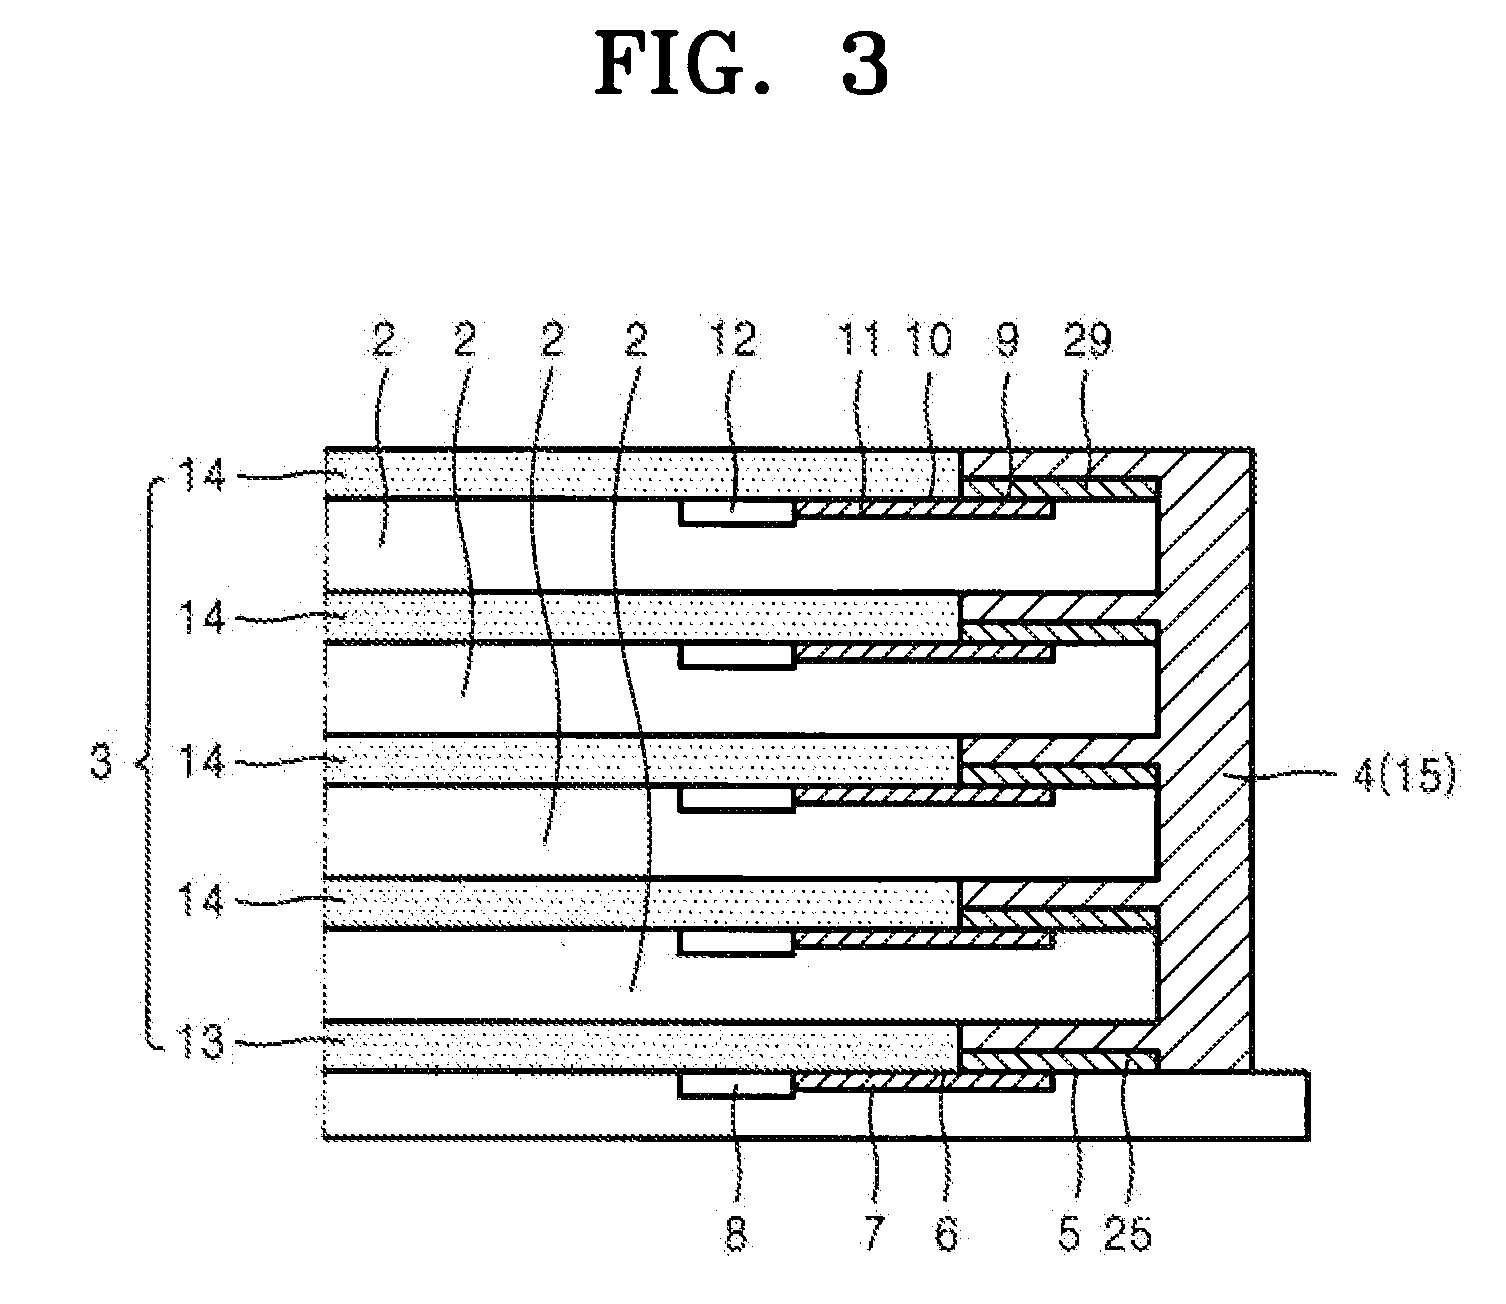 Stack-type semiconductor package